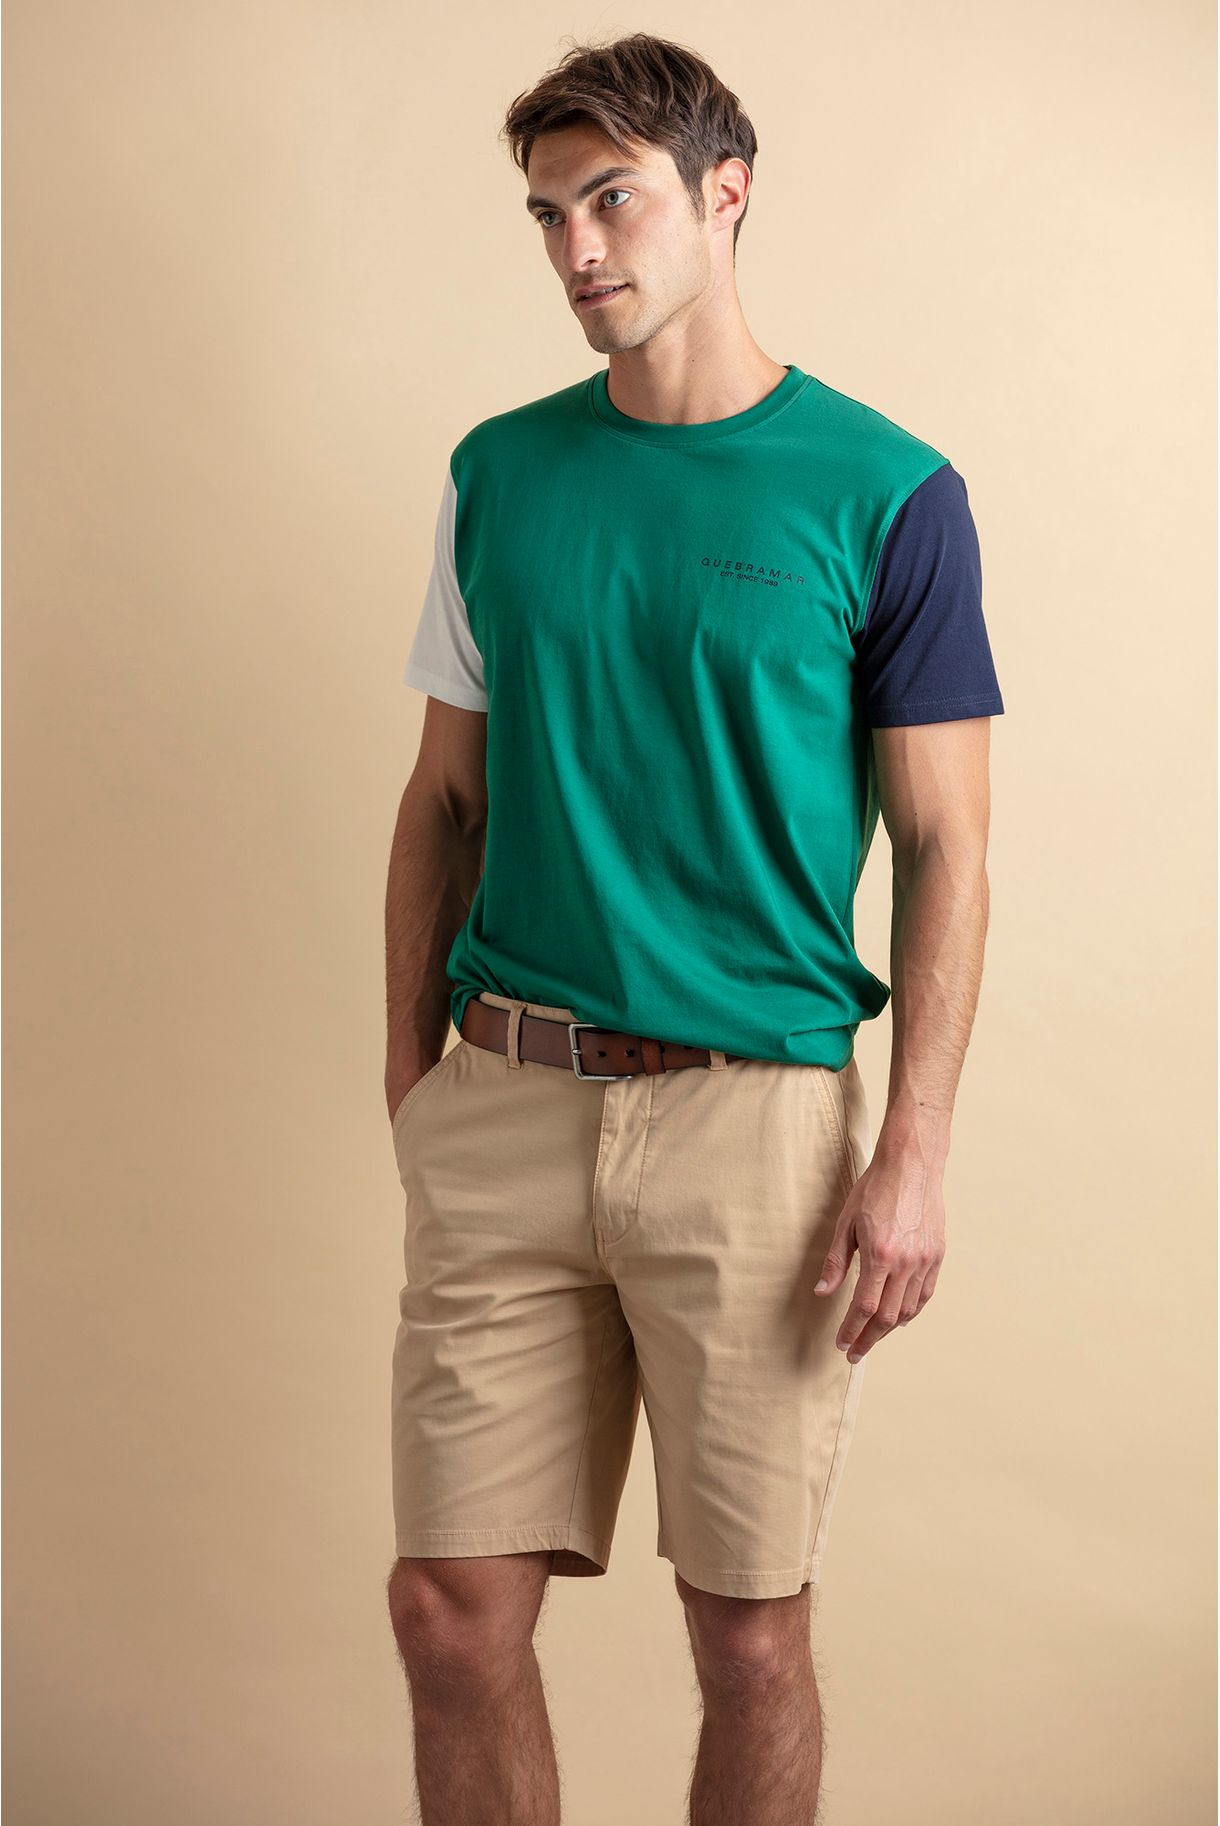 Men's T-shirt with contrasts